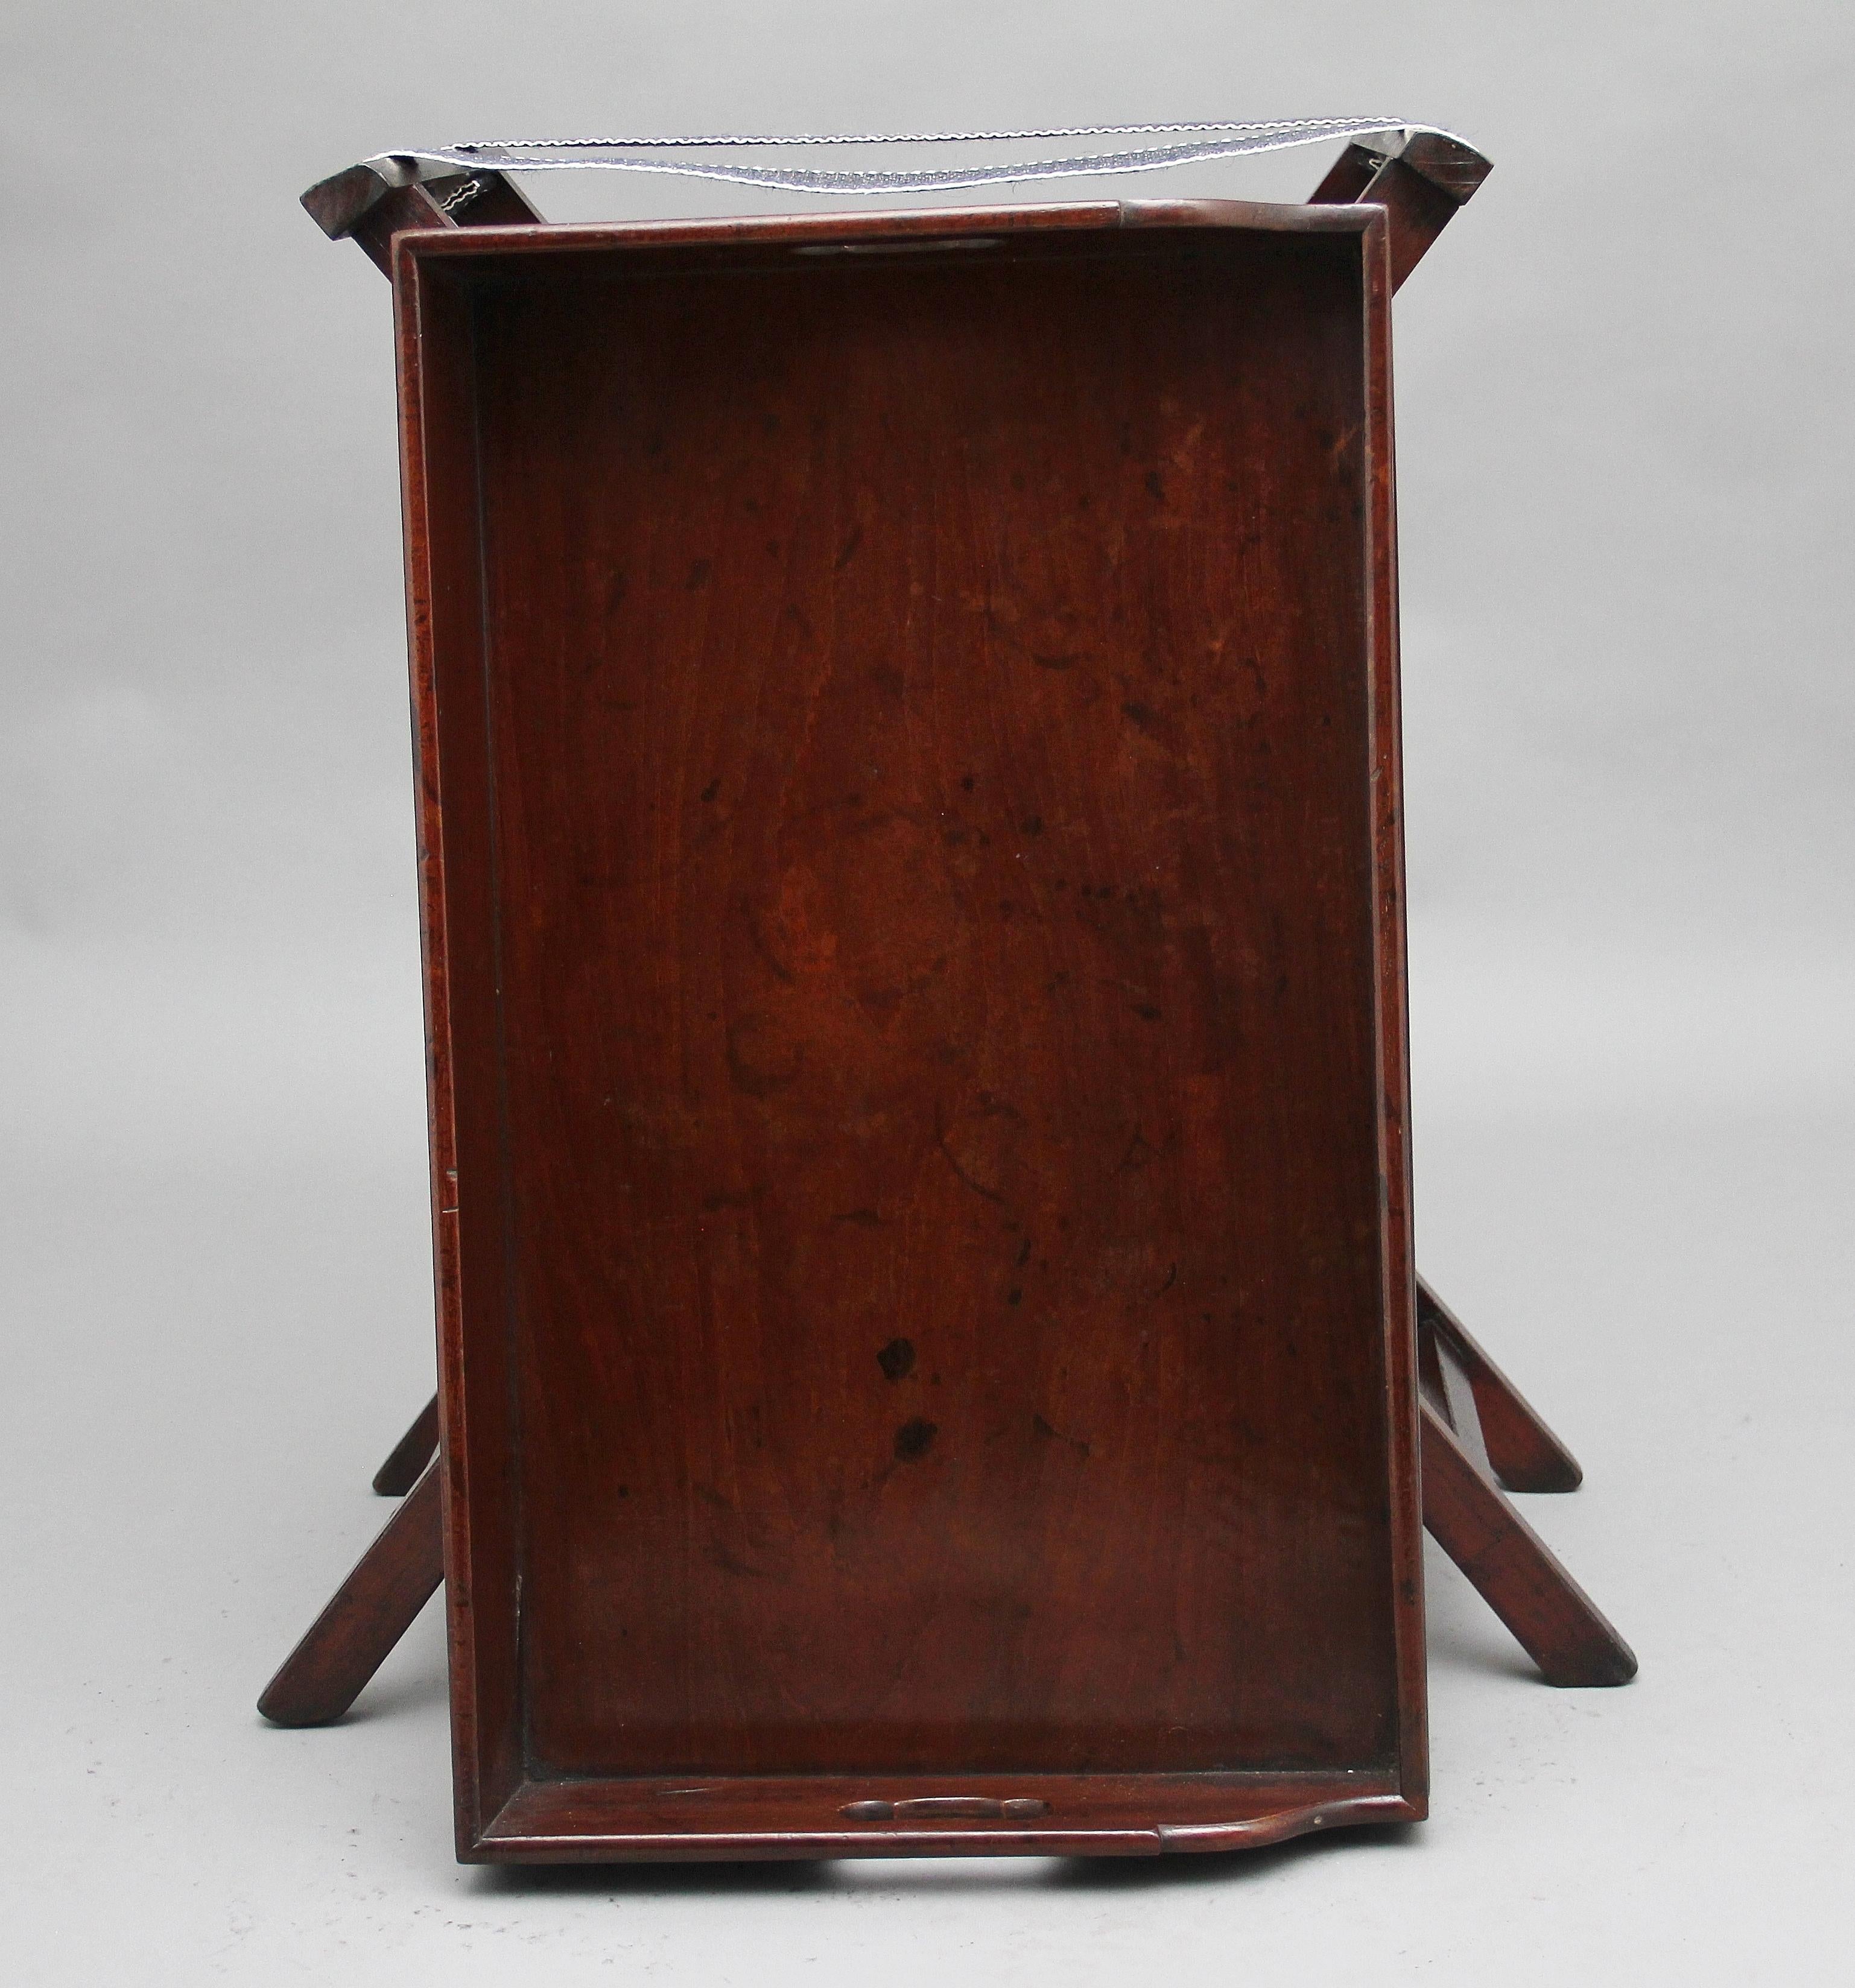 British Early 19th Century Mahogany Butlers Tray on Stand